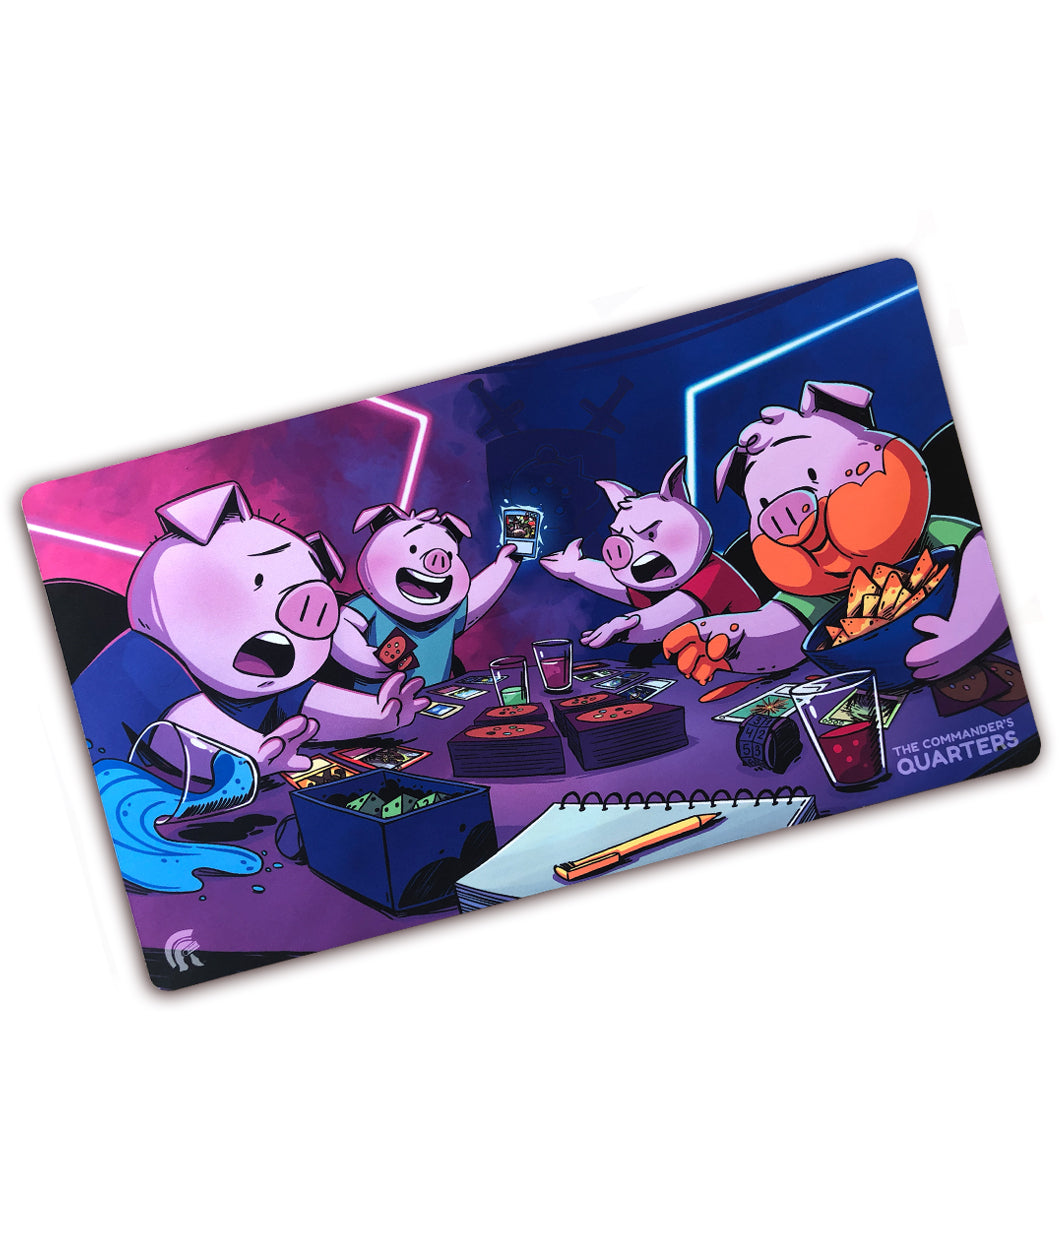 A rectangular playmat with curved edges. An image on the playmat shows four anthropomorphized pigs playing cards, each with a different exaggerated expression. The table is cluttered and the background has neon lights. “The Commander’s Quarters” is in the bottom right in gray sans serif font - from the Commander’s Quarters